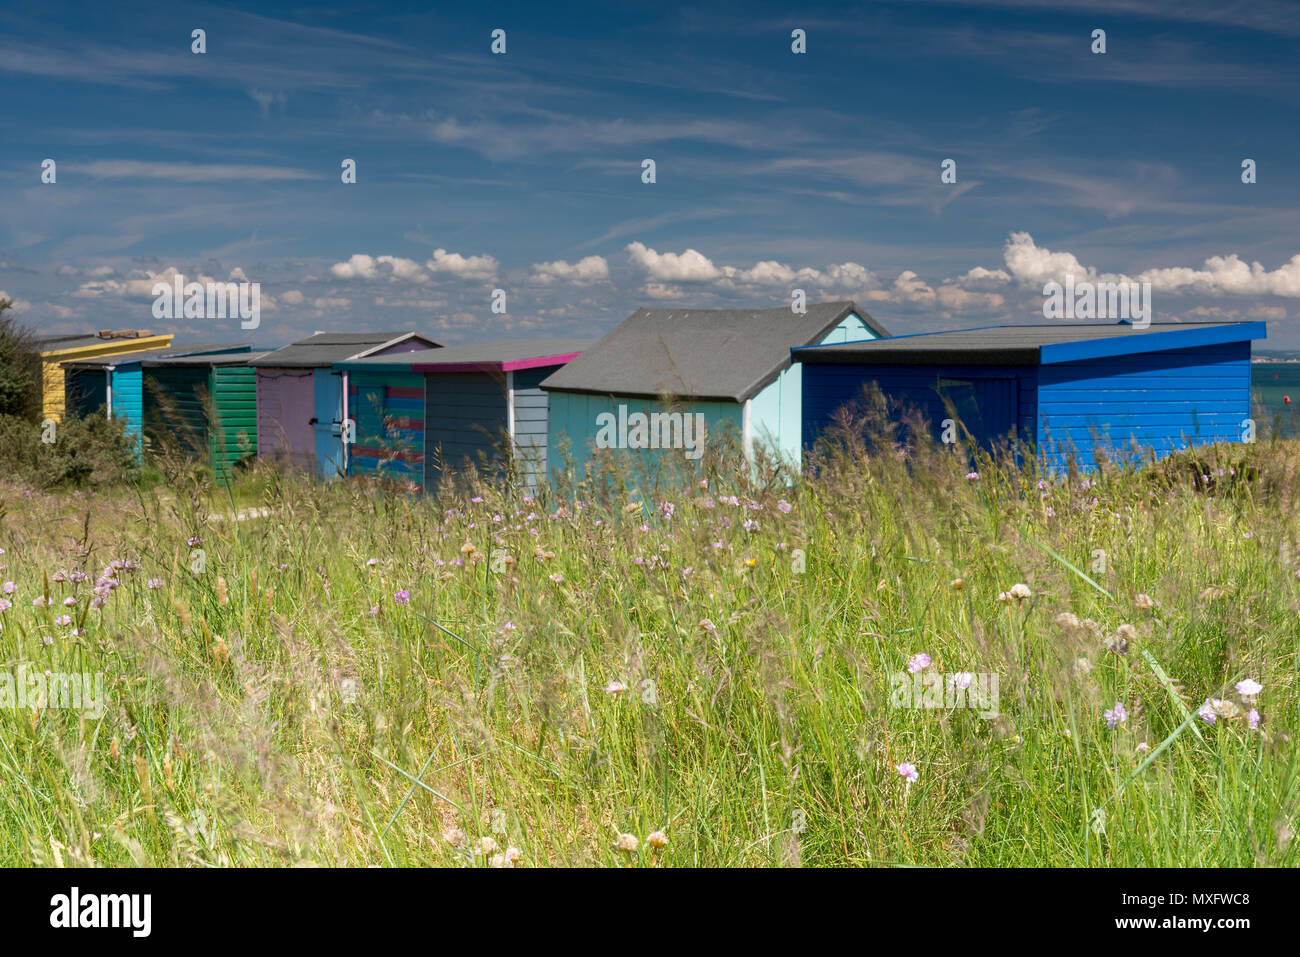 A row of brightly coloured beach huts at bembridge duvet on the Isle of Wight with an interesting cloud formation above on a hot weather summers day. Stock Photo